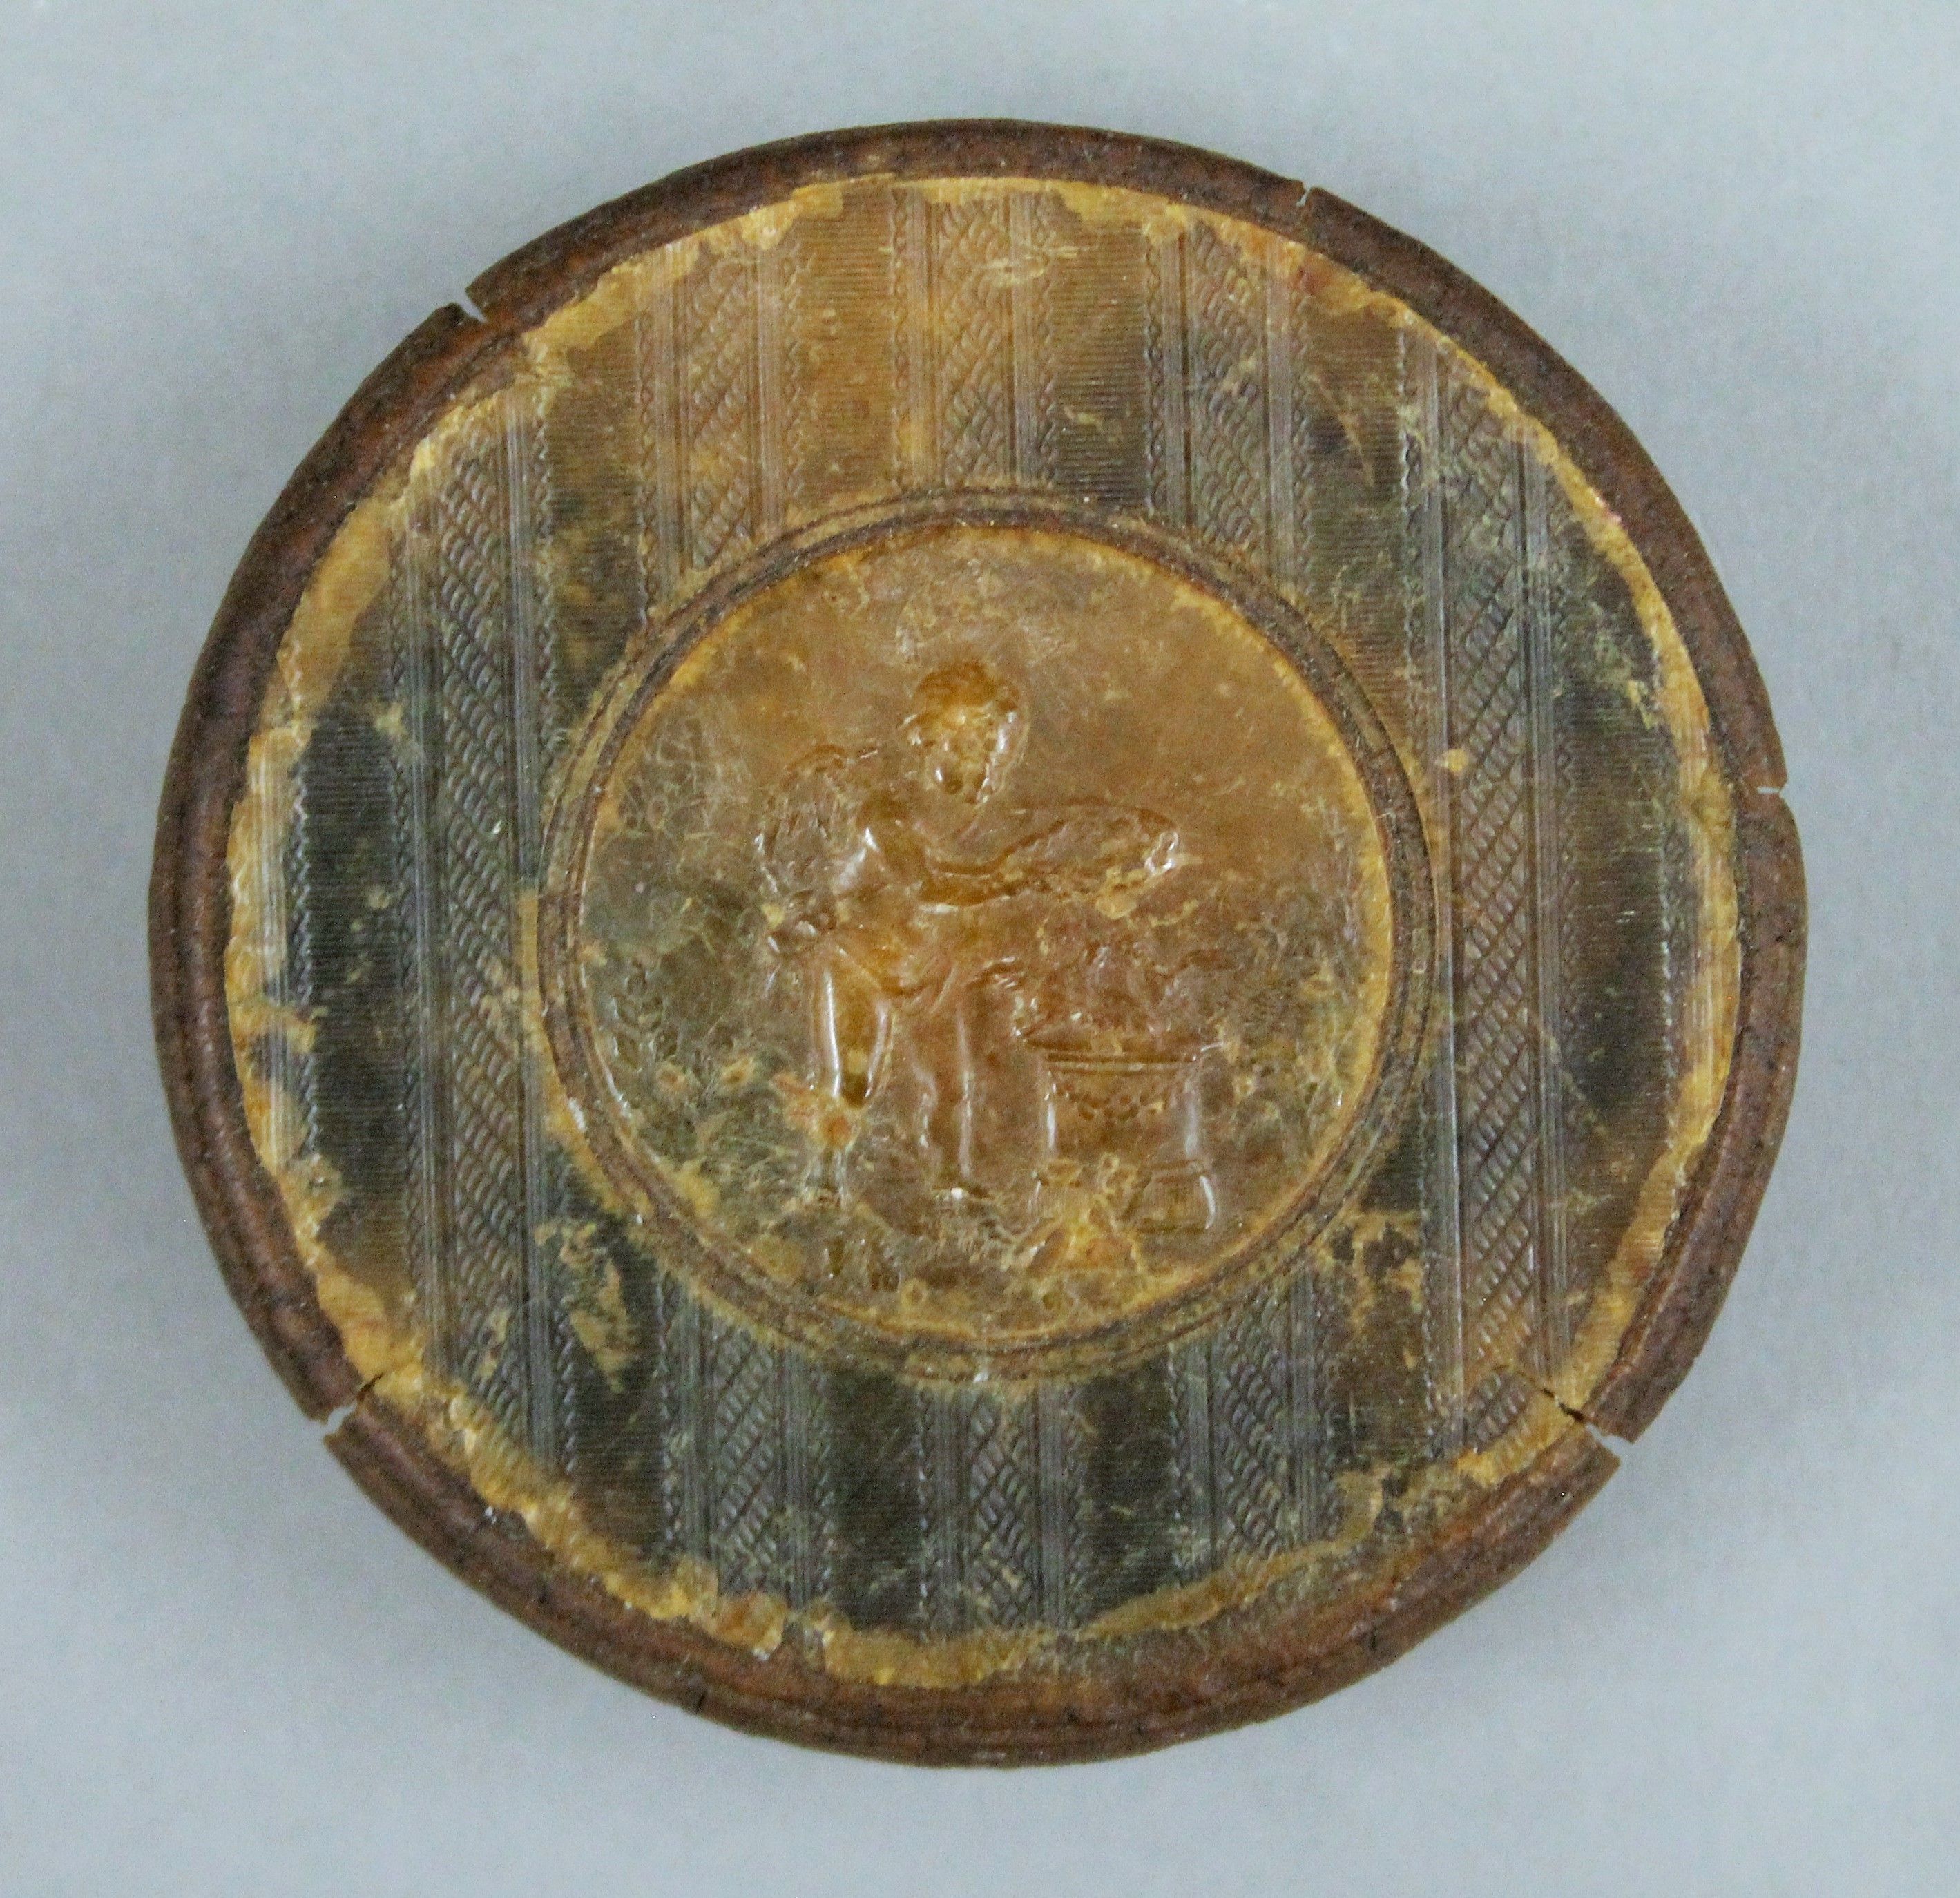 Two snuff boxes and a mauchline ware needle case. - Image 7 of 8